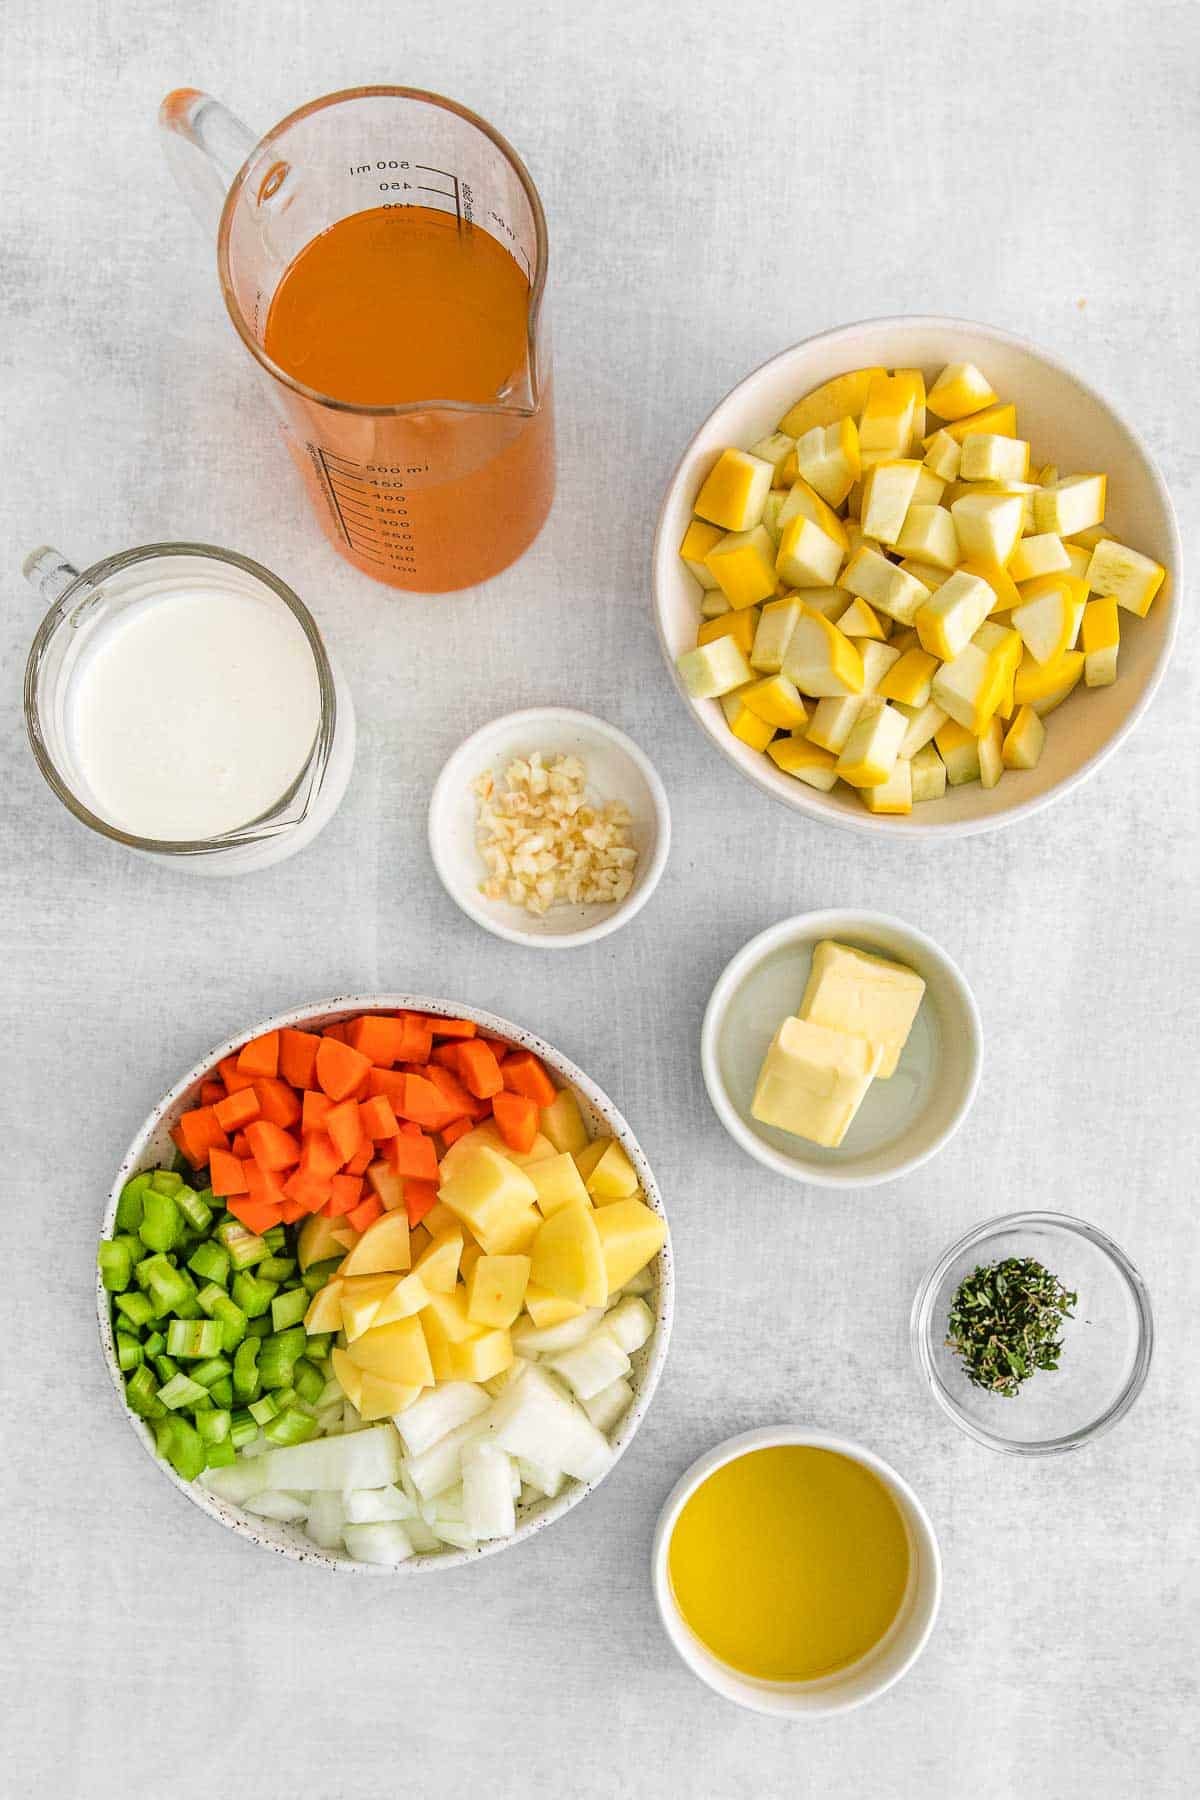 Several bowls of ingredients for Yellow Squash Soup - Olive oil, onion, carrots, celery, Yukon gold potato, yellow squash, garlic, thyme, vegetable broth, heavy cream and butter.